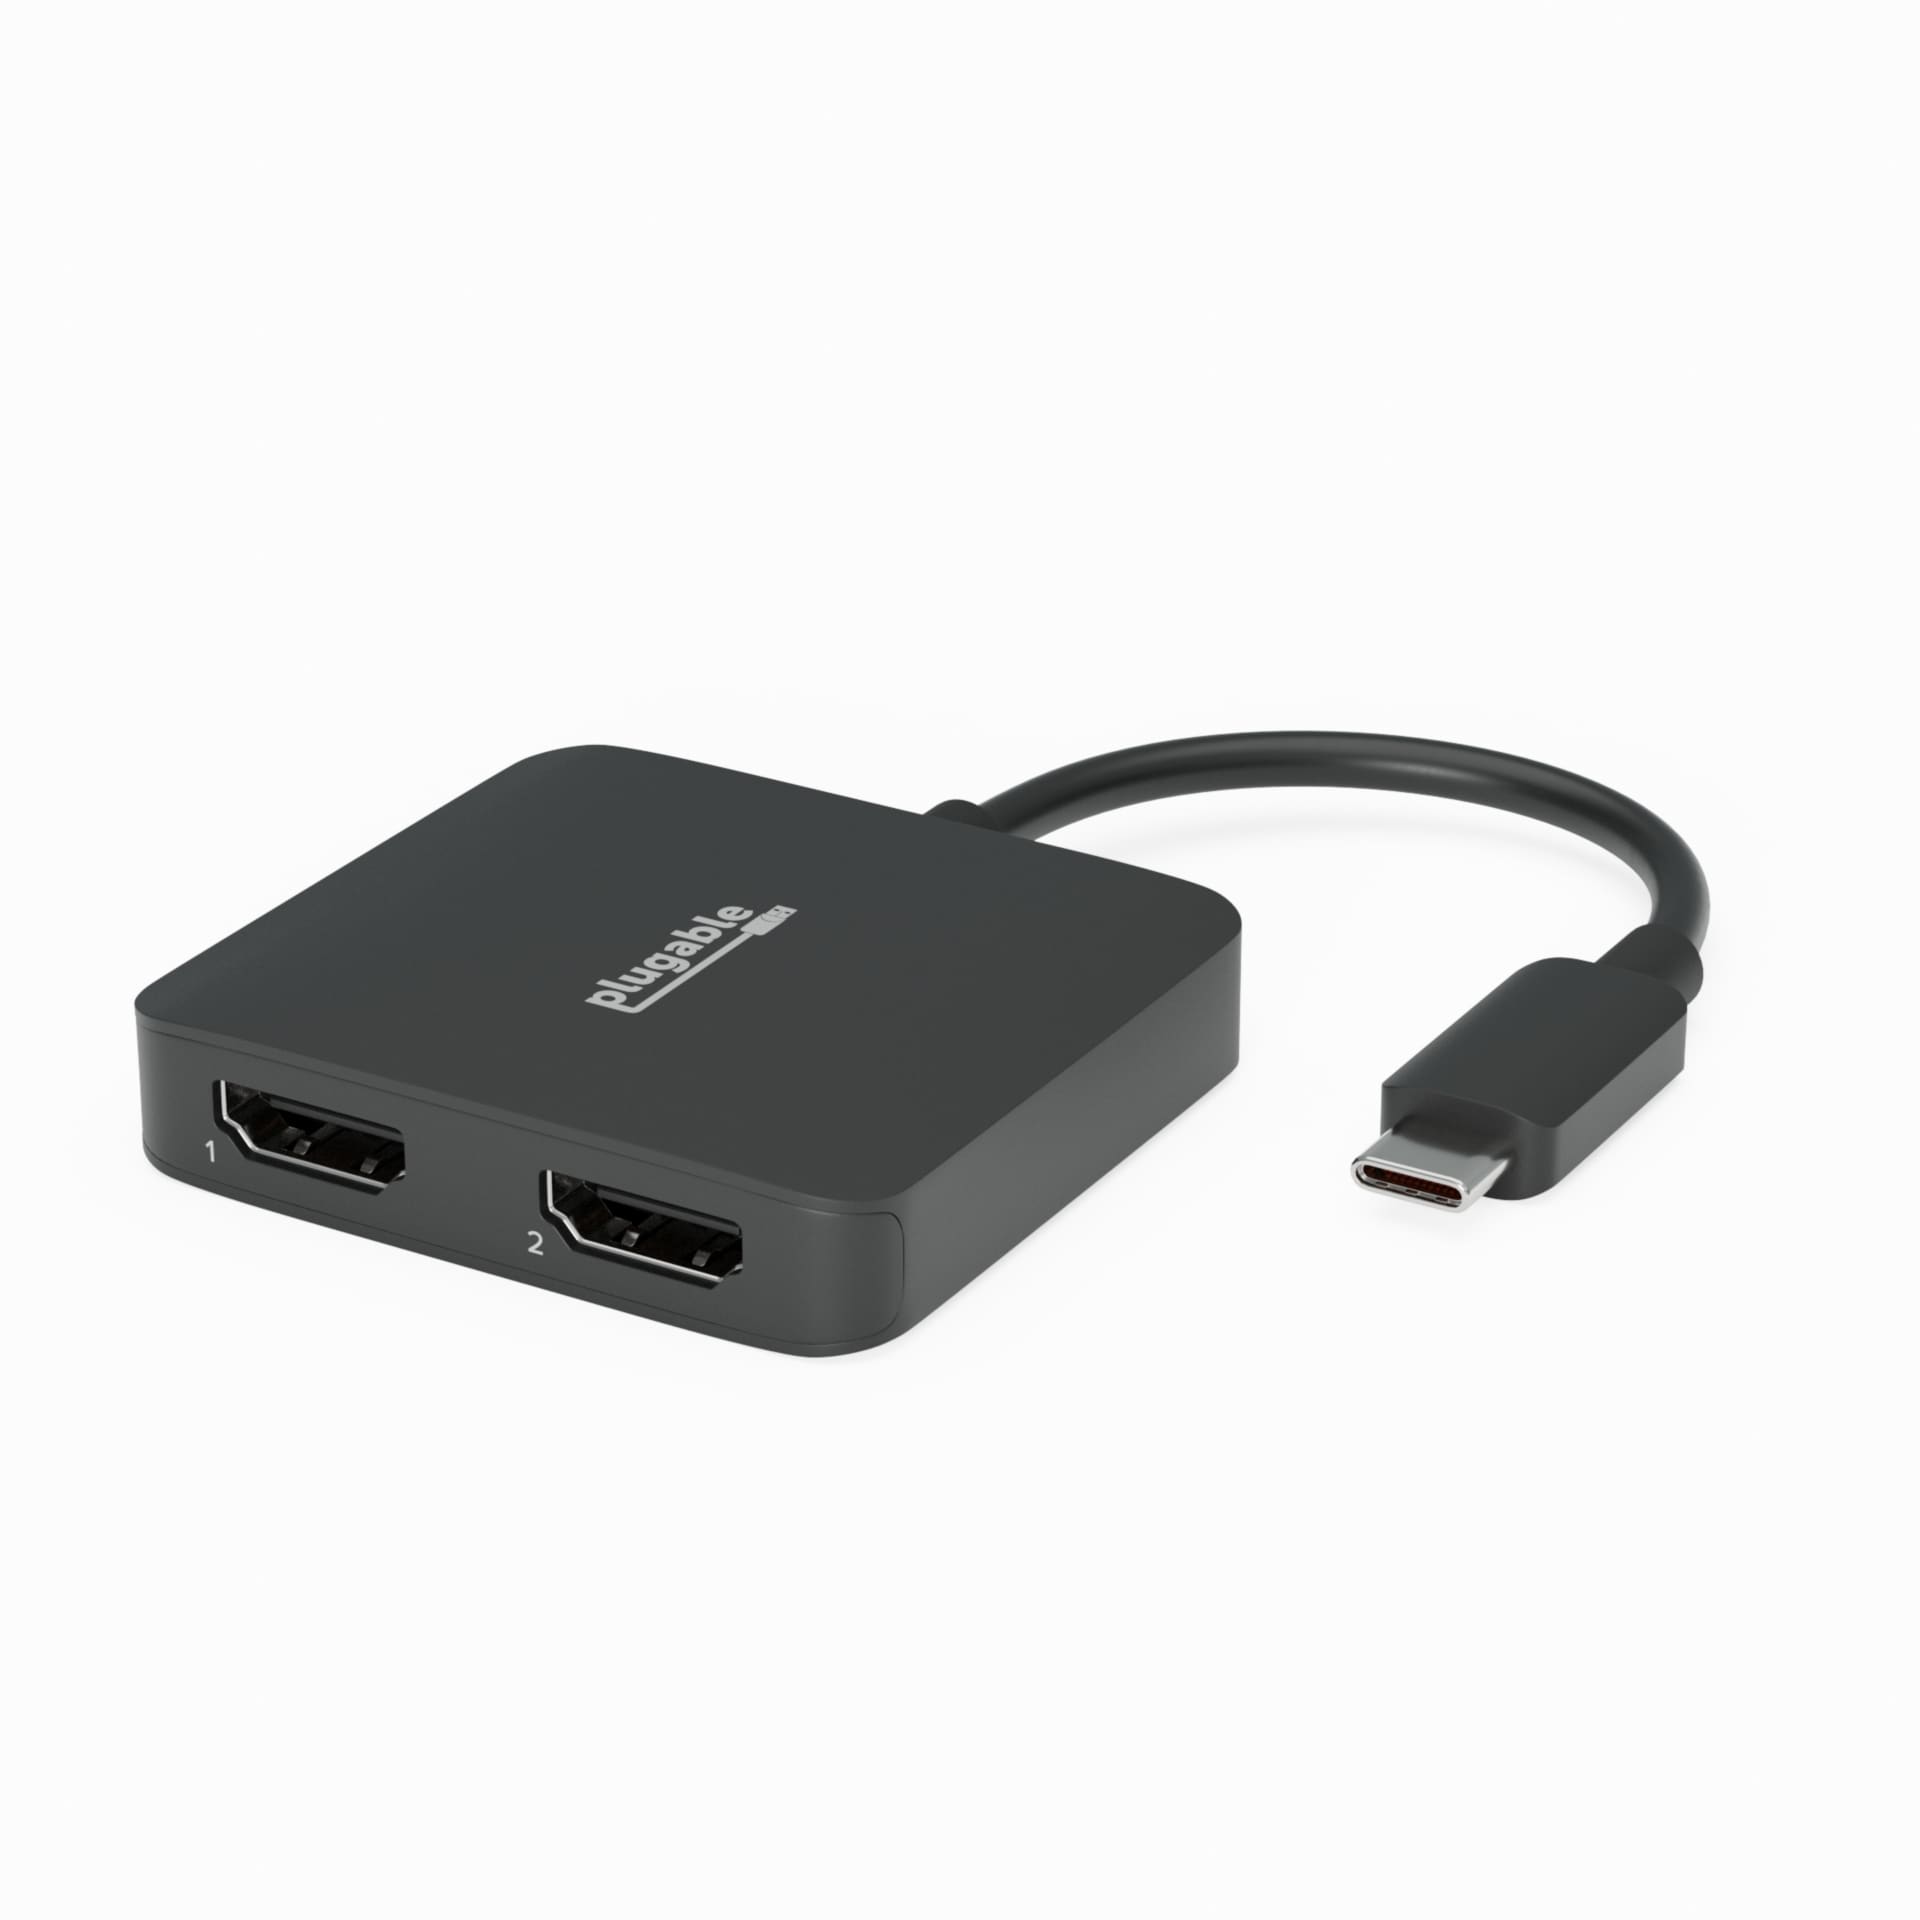 Plugable USB C to HDMI Adapter for Dual Monitors